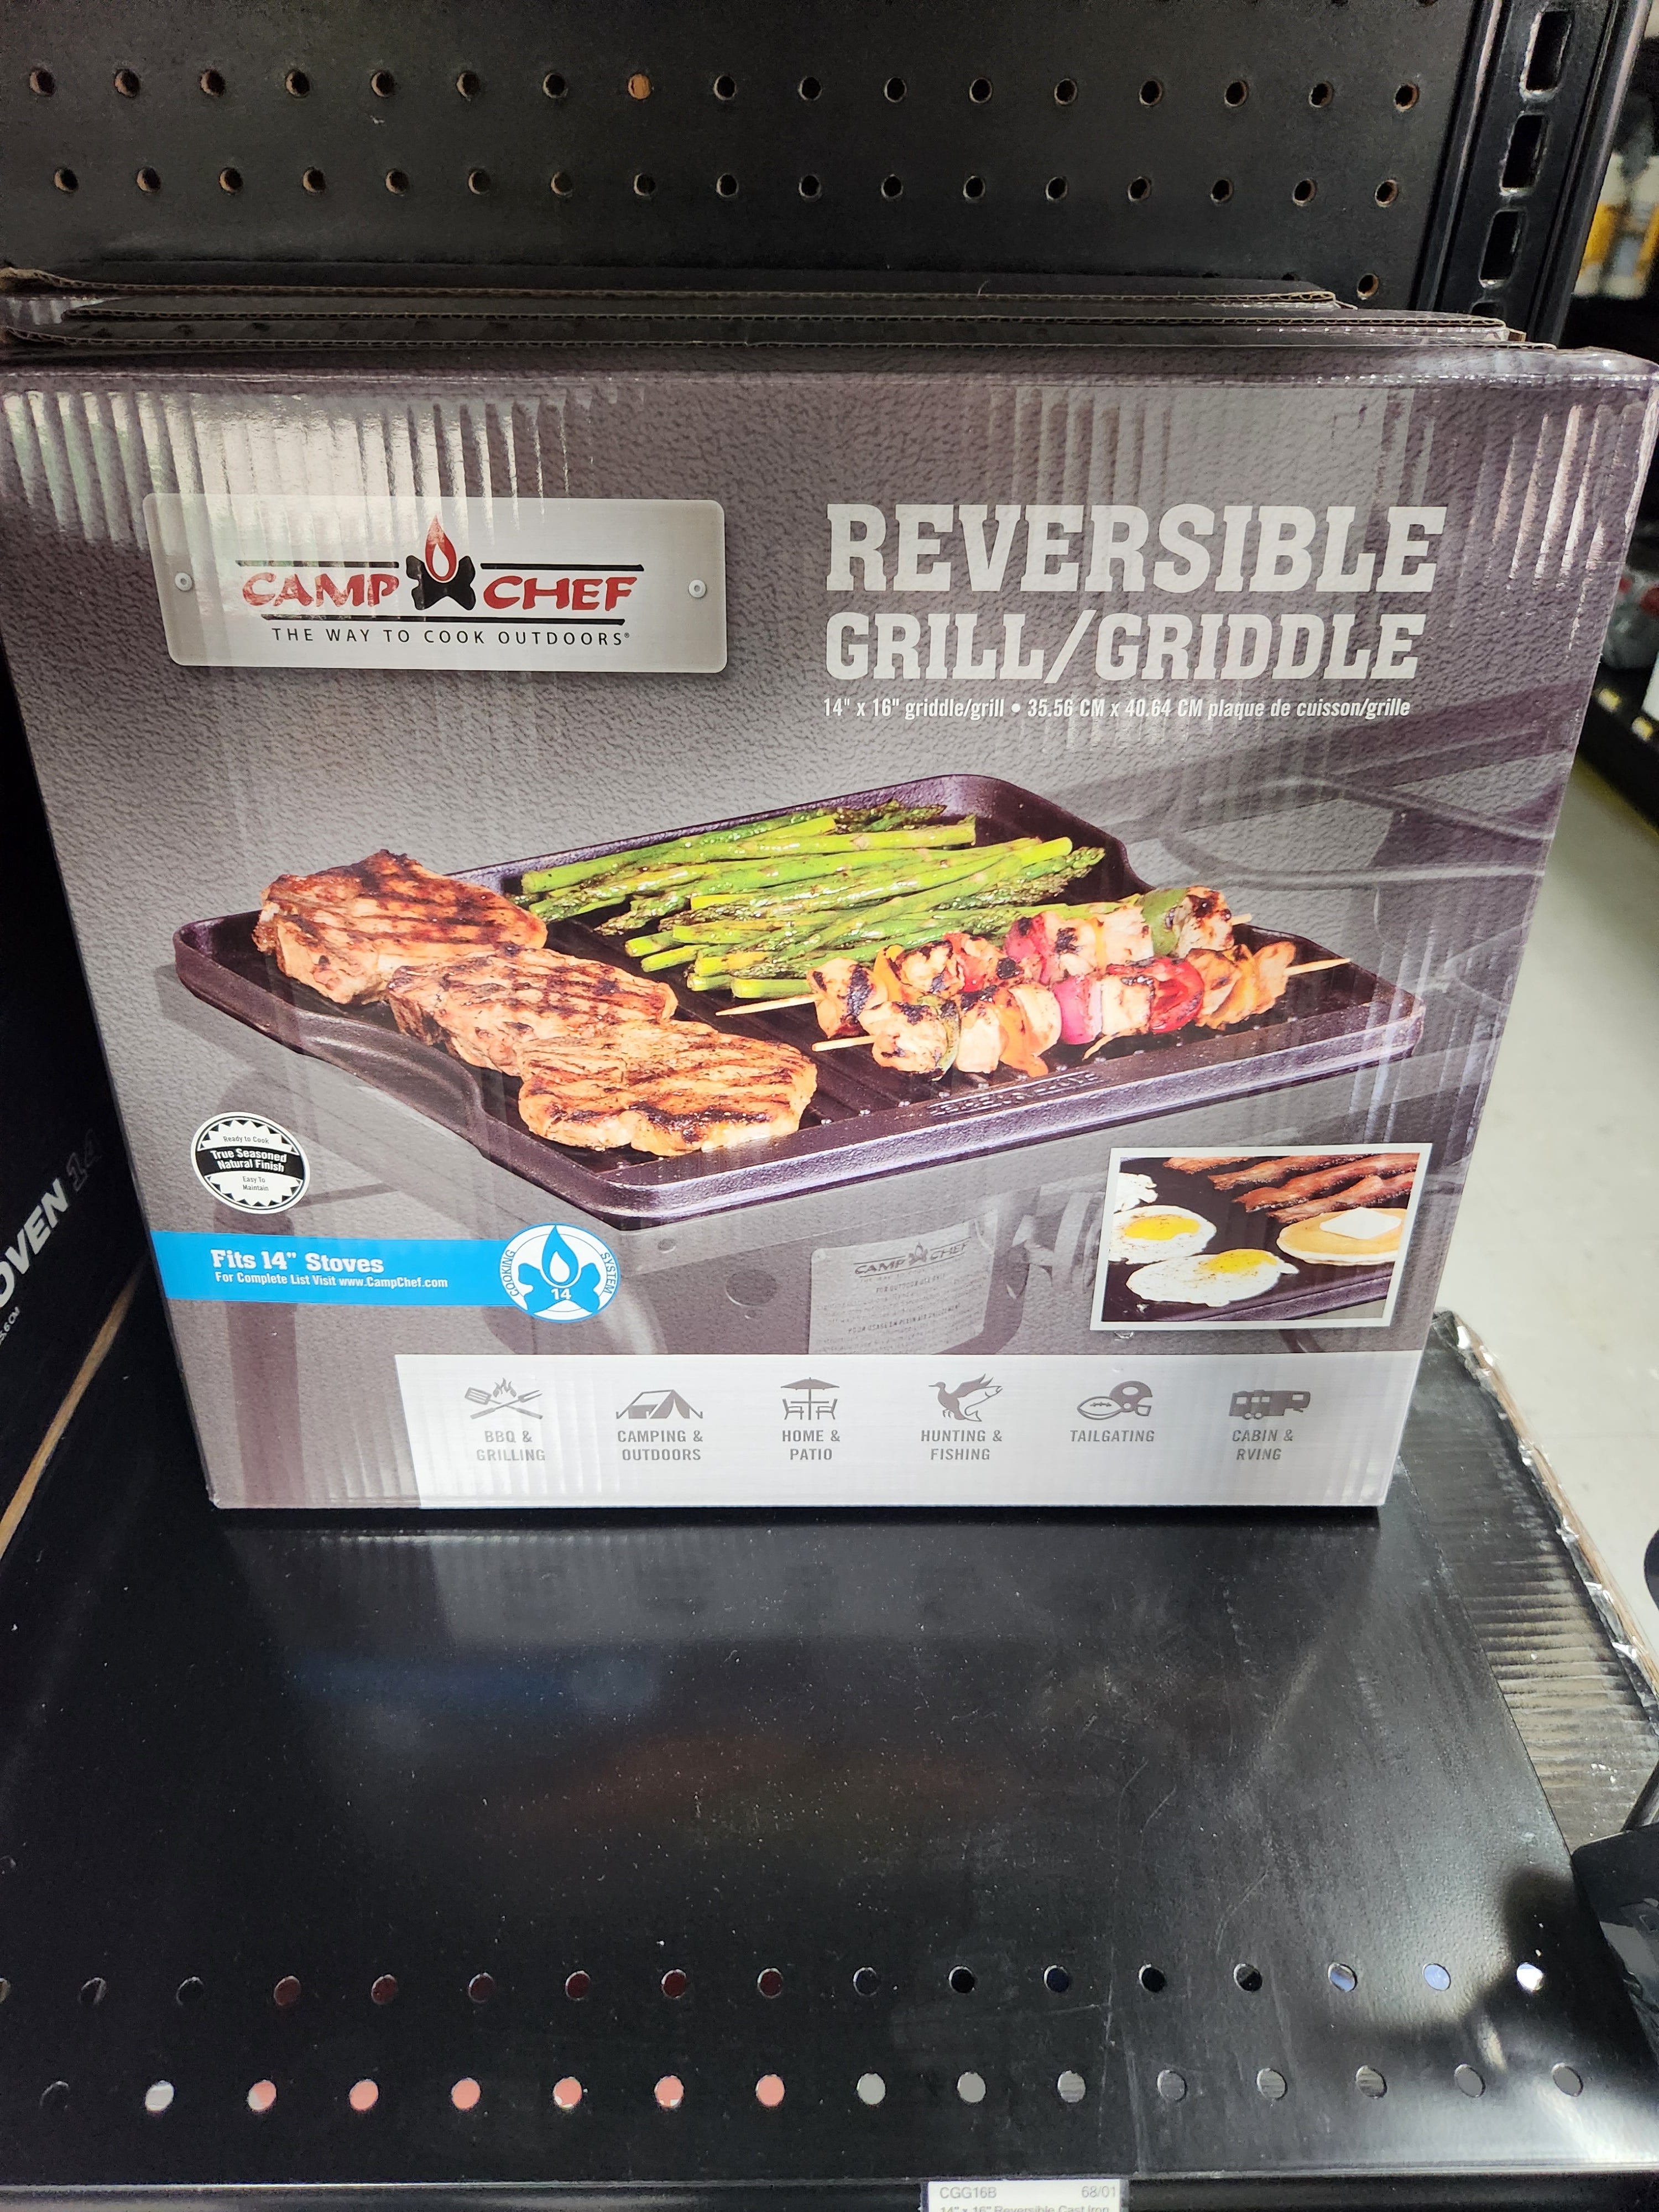 Camp Chef Reversible Grill/Griddle 14x16" griddle/grill